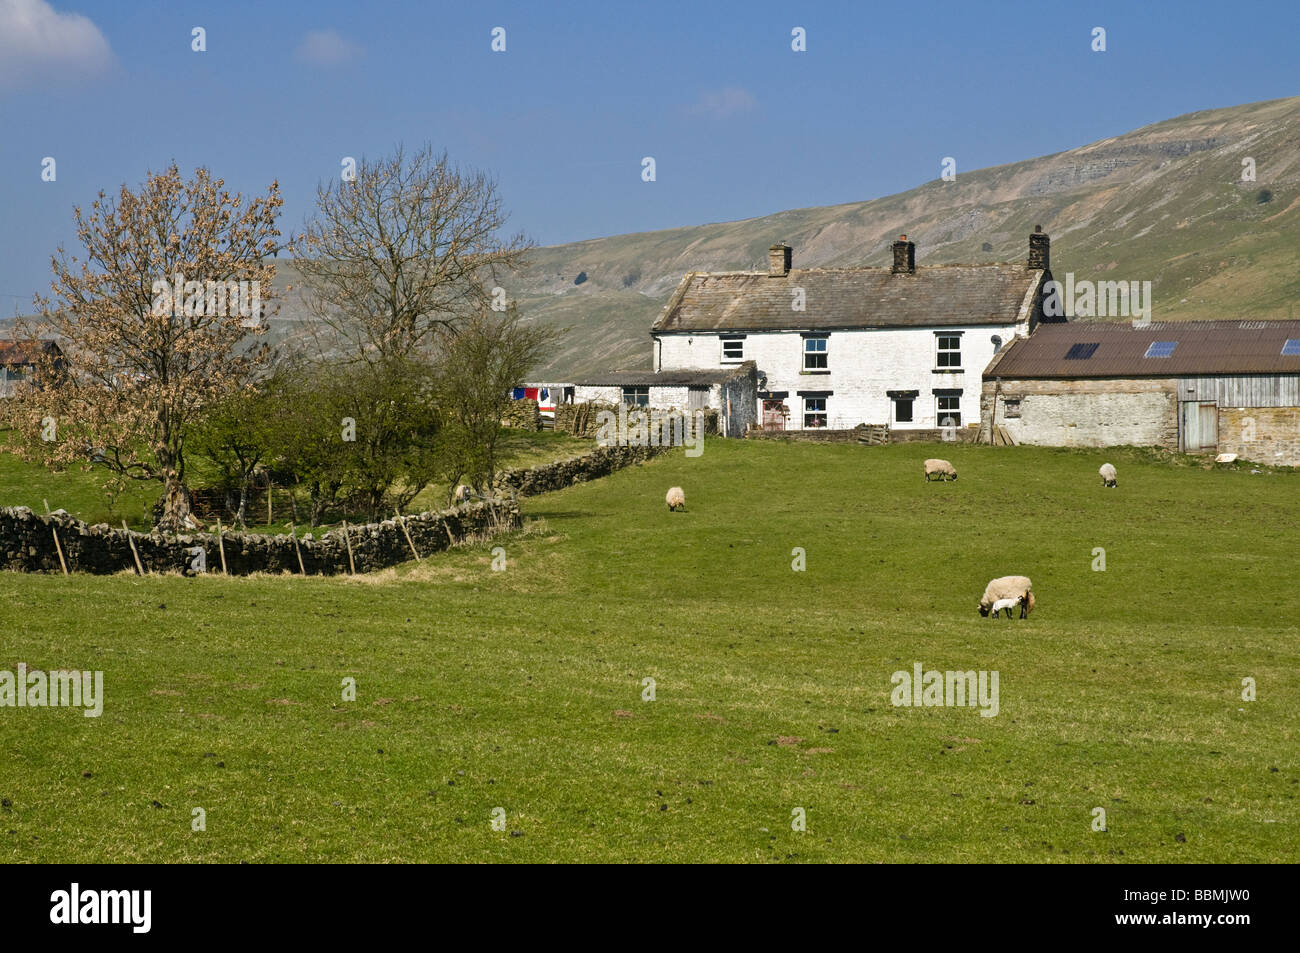 dh Yorkshire Dales National Park ARKENGARTHDALE NORTH YORKSHIRE Farmhouse and brebis in field UK Farms british Farm rural Spring Landscape Farm Banque D'Images